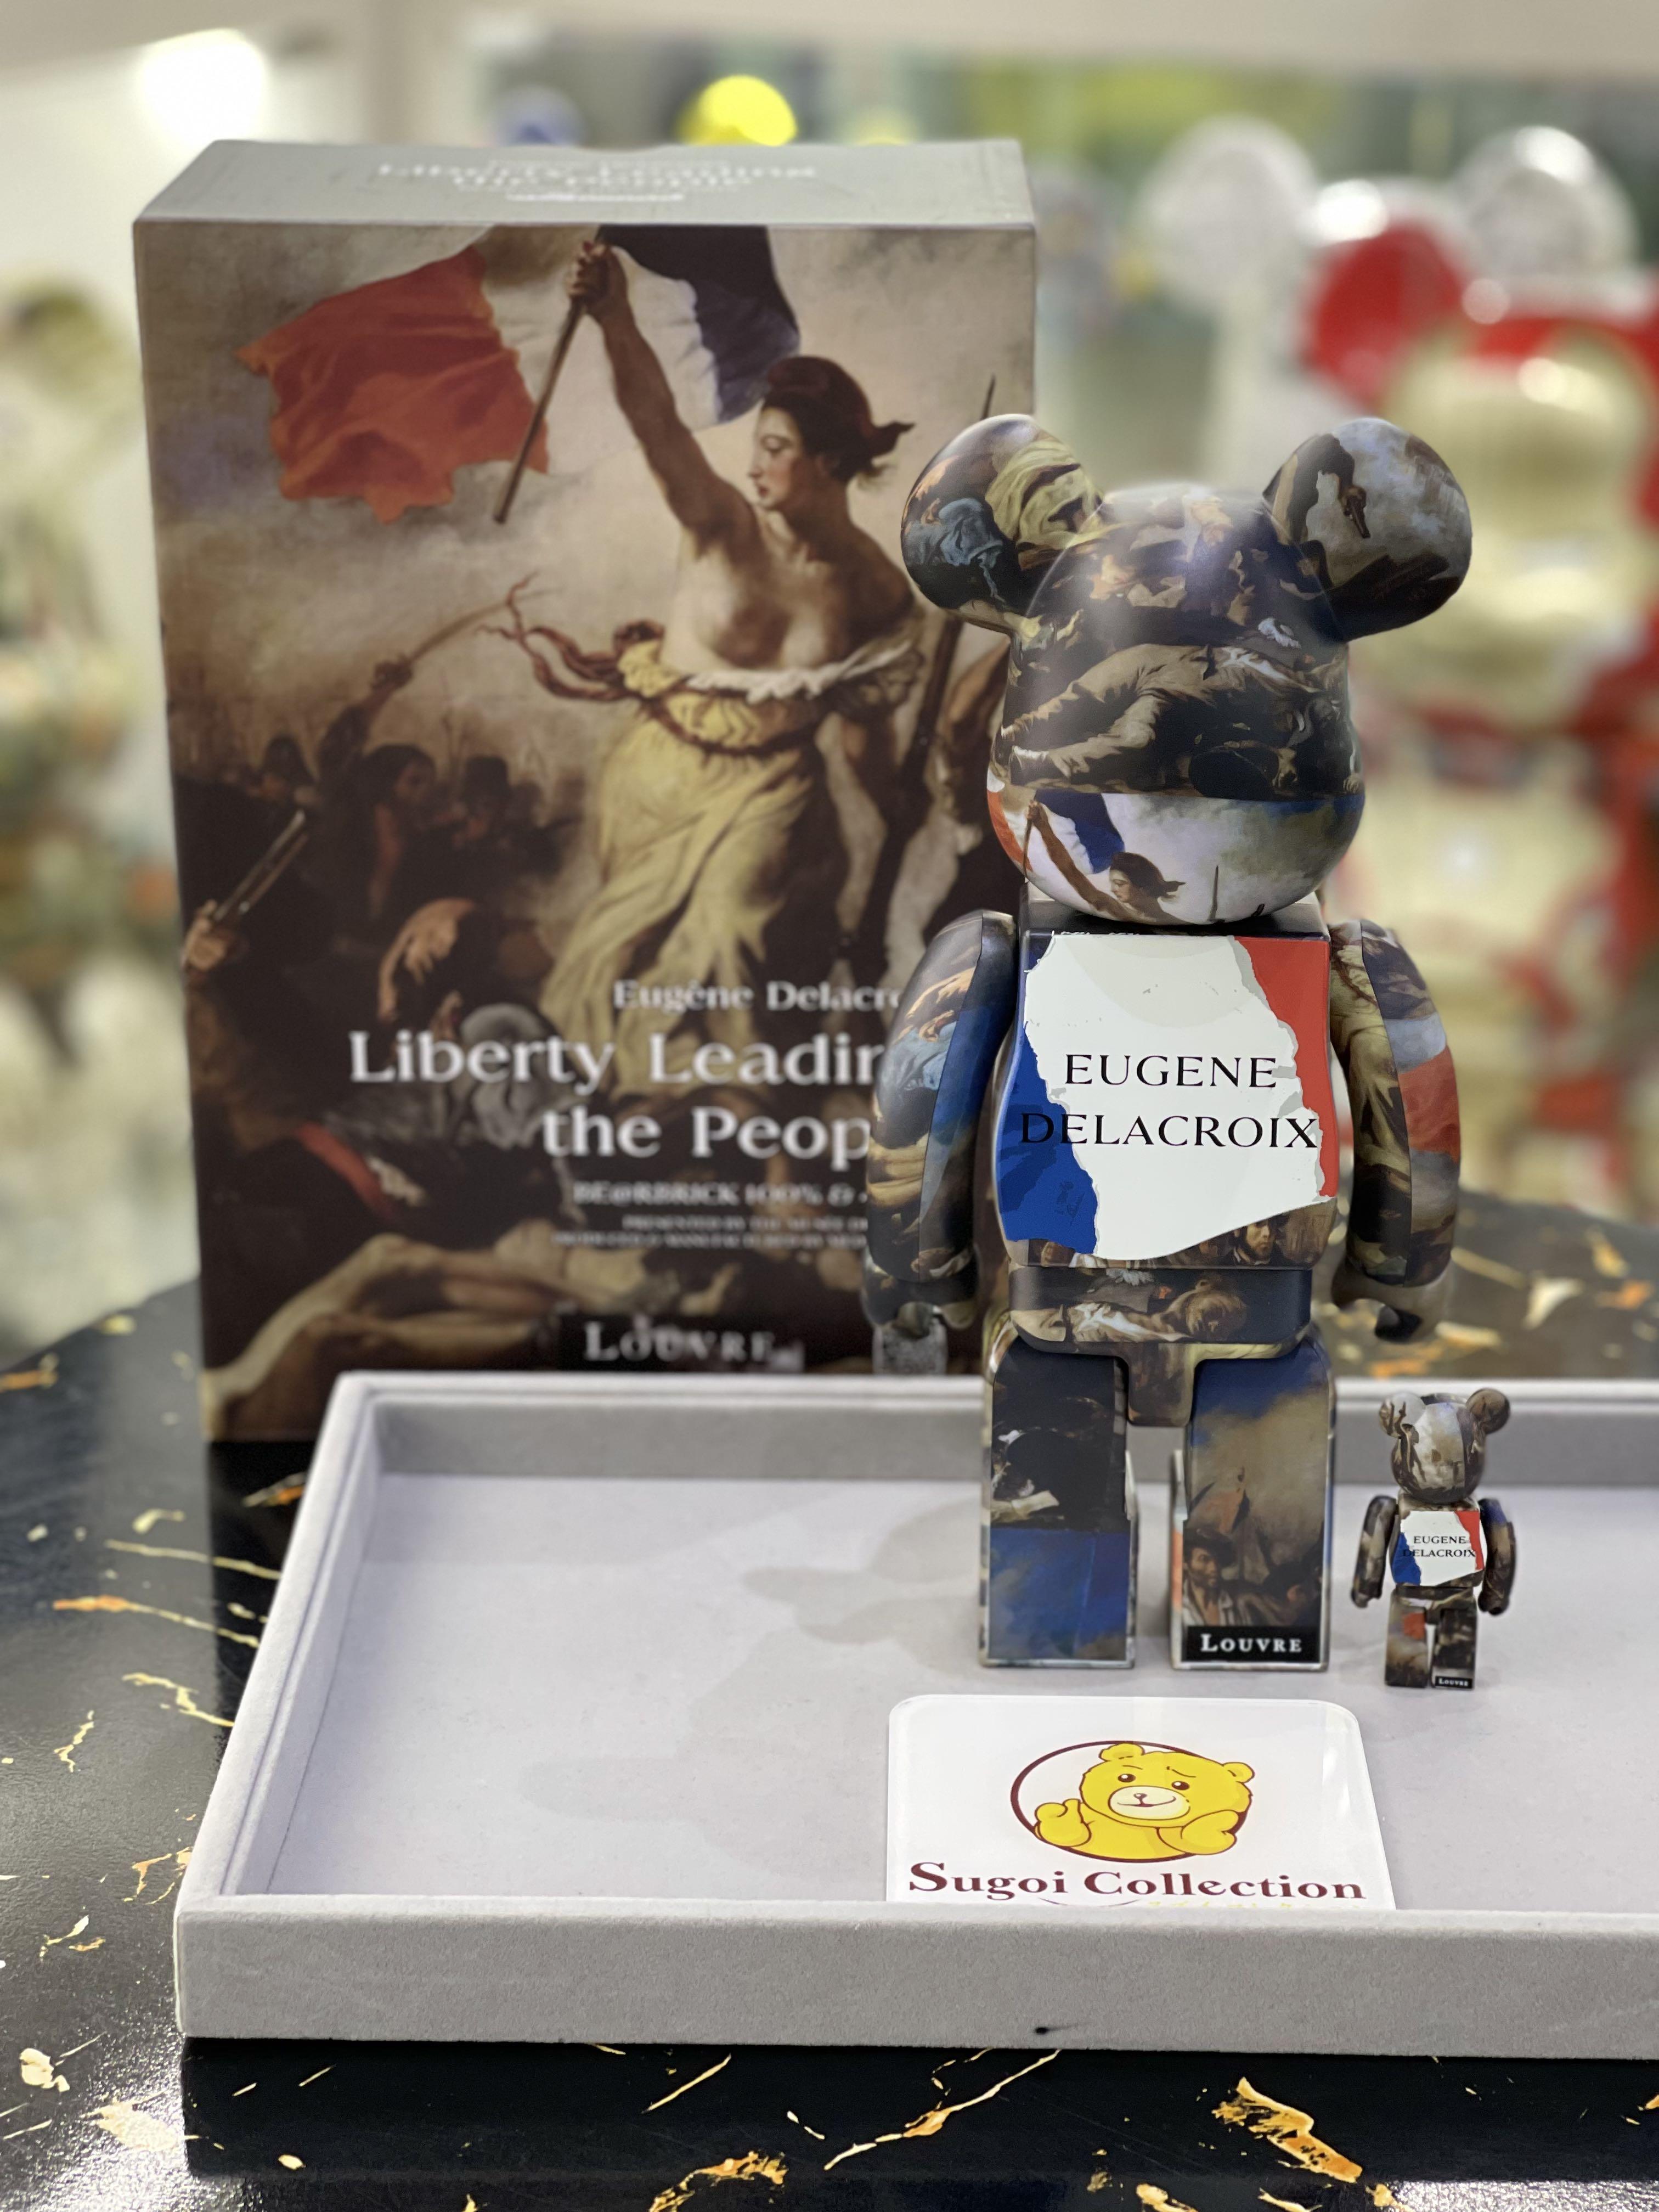 BE@RBRICK x Eugene Delacroix “Liberty Leading the People” 100%+400% se –  Sugoi Collection